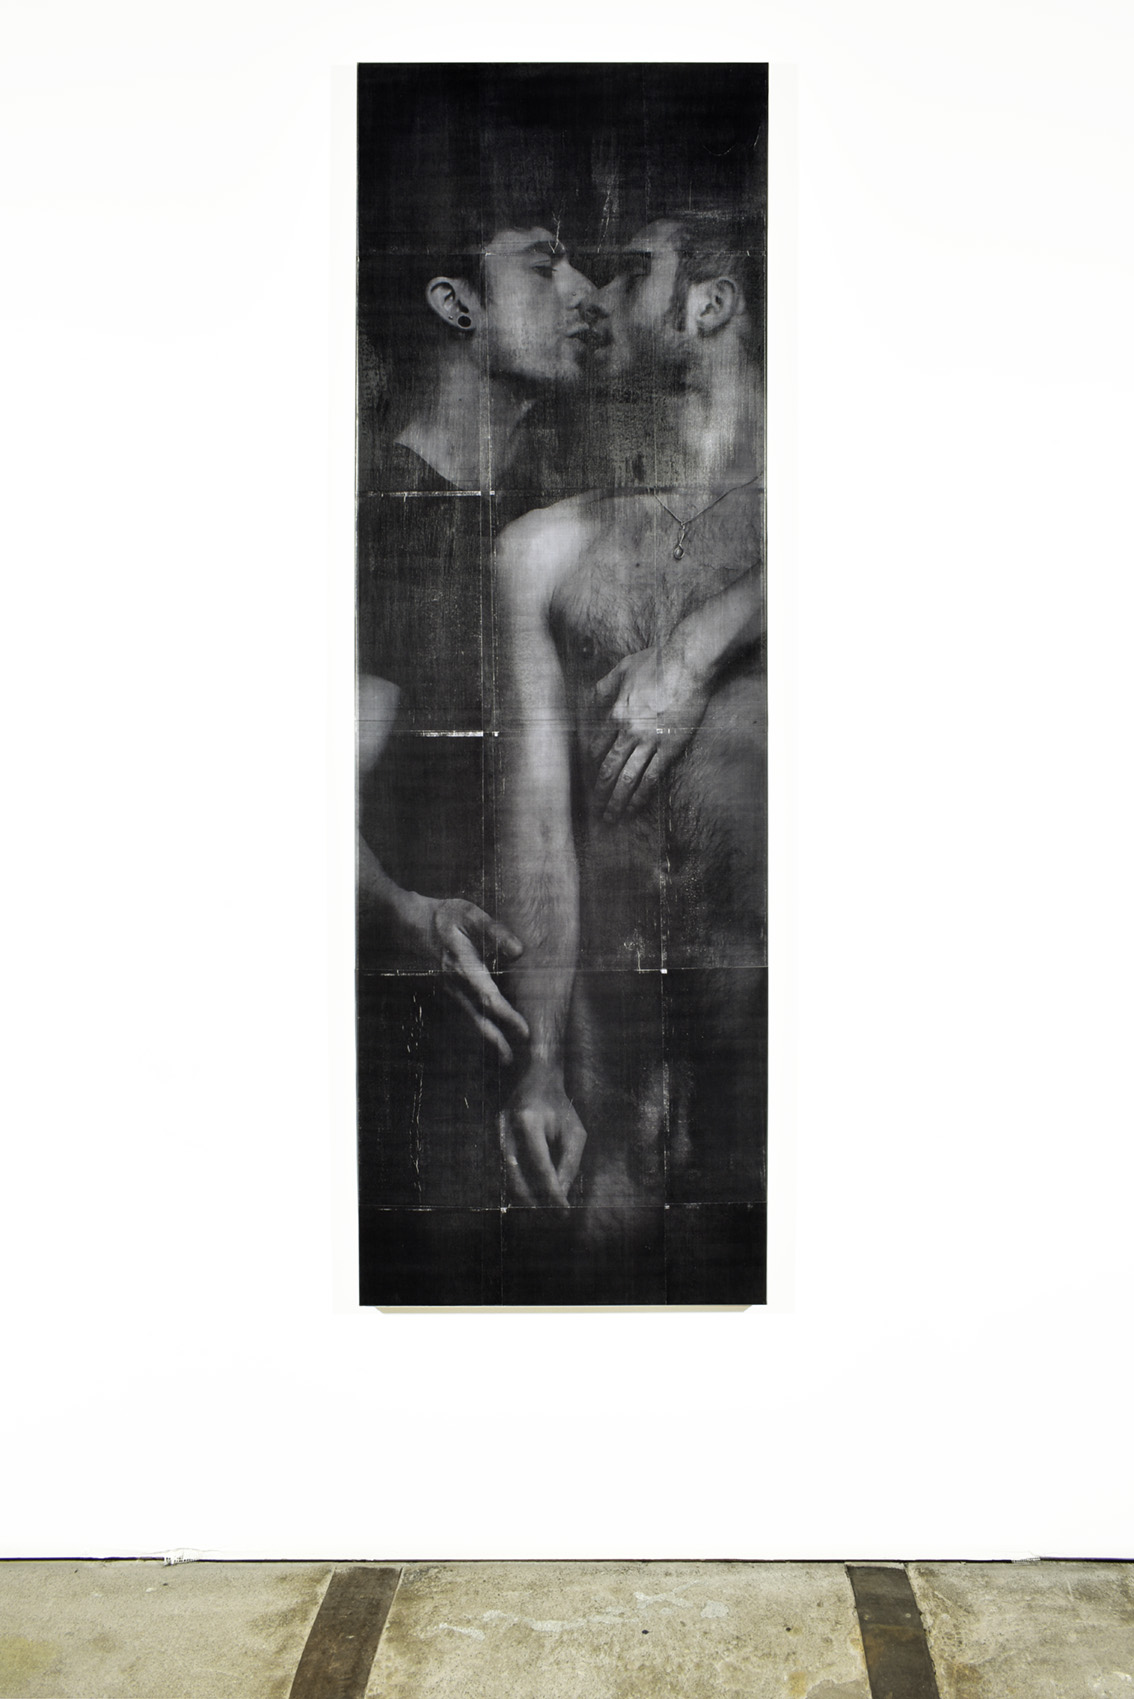 Hunting for memories, a reworked autoportrait with cedric from 2008, laserprint, pigment and varnish on art panel 175 x 50 cm